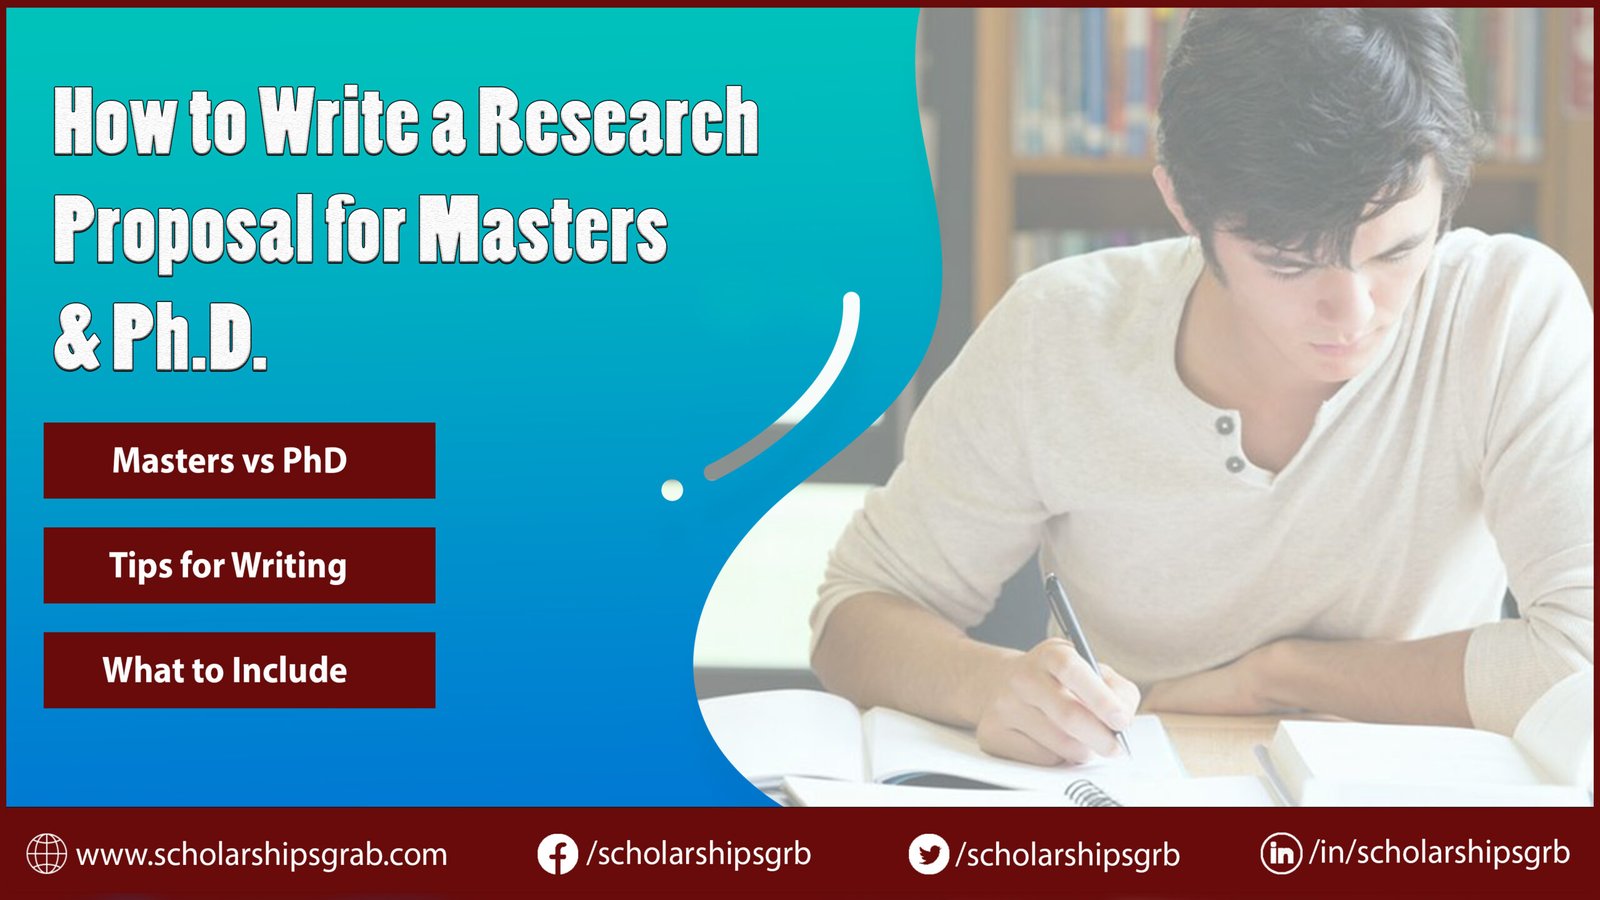 How to Write a Research Proposal for Masters and PhD